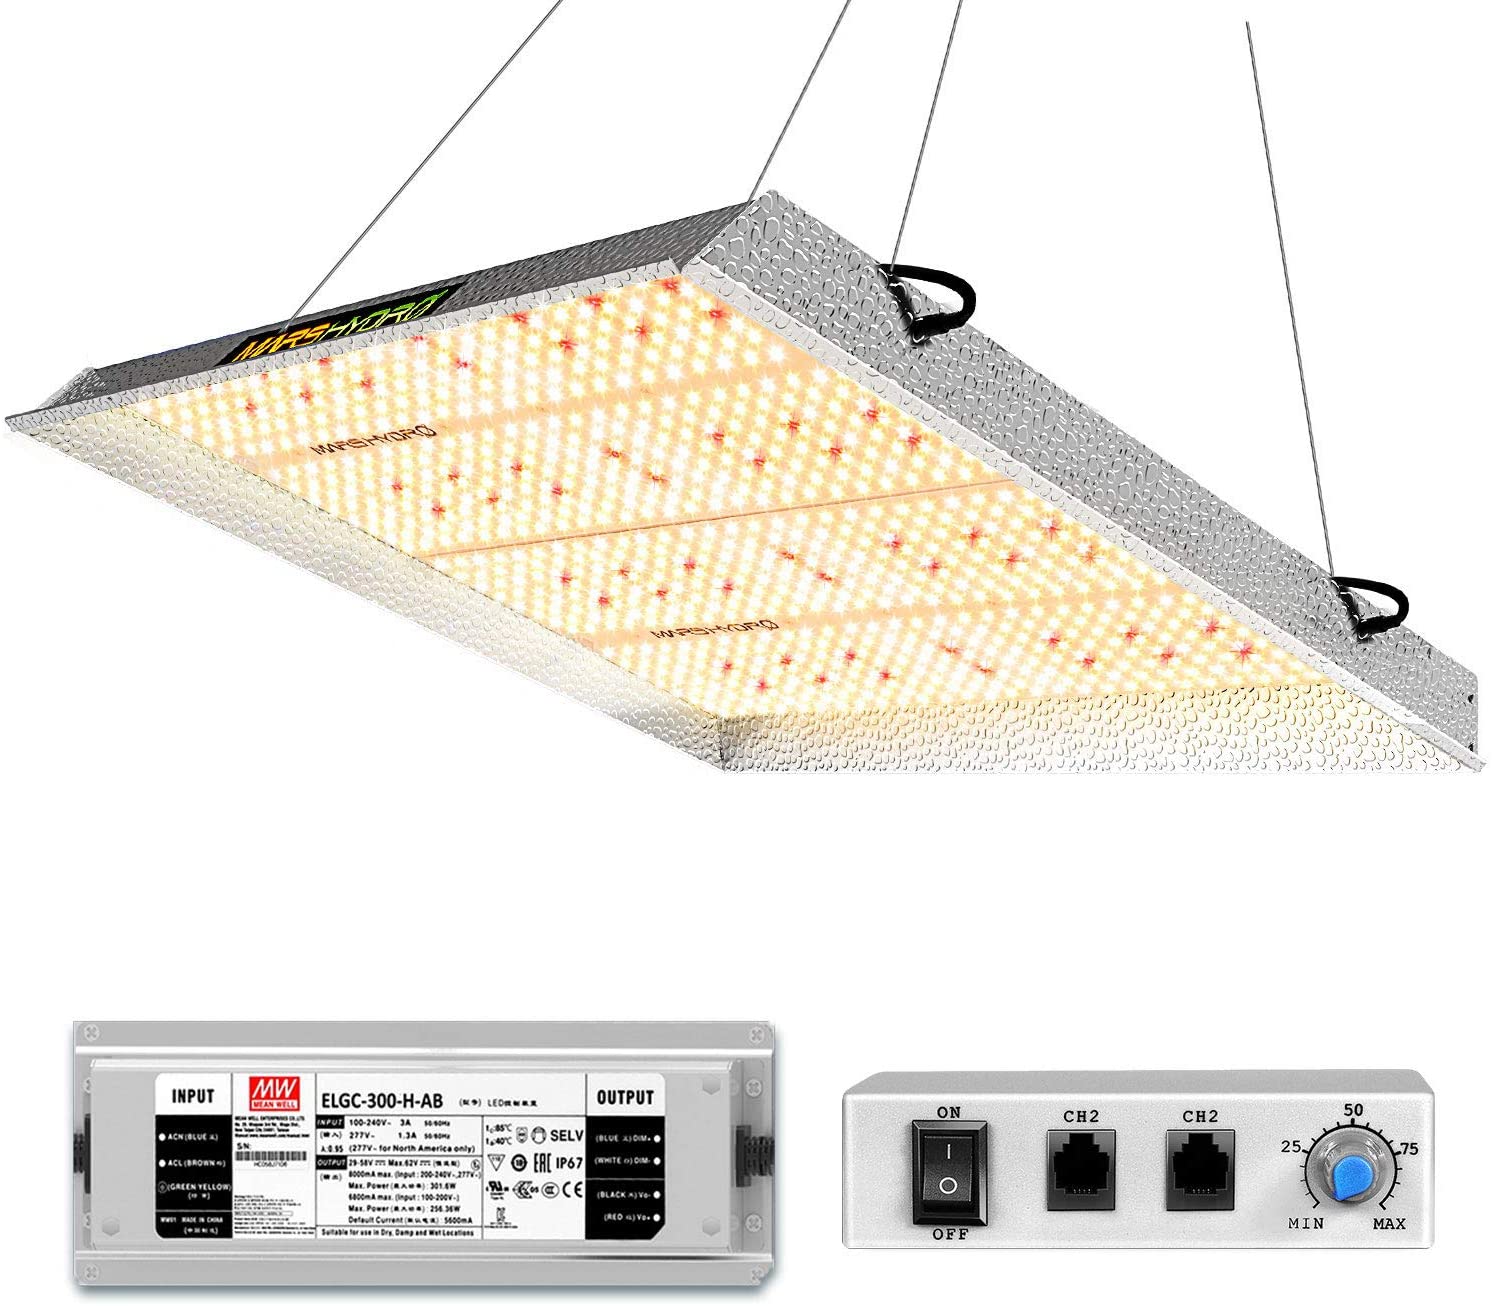 Mars Hydro TS-3000 LED Grow Light Review, Results, and Experience